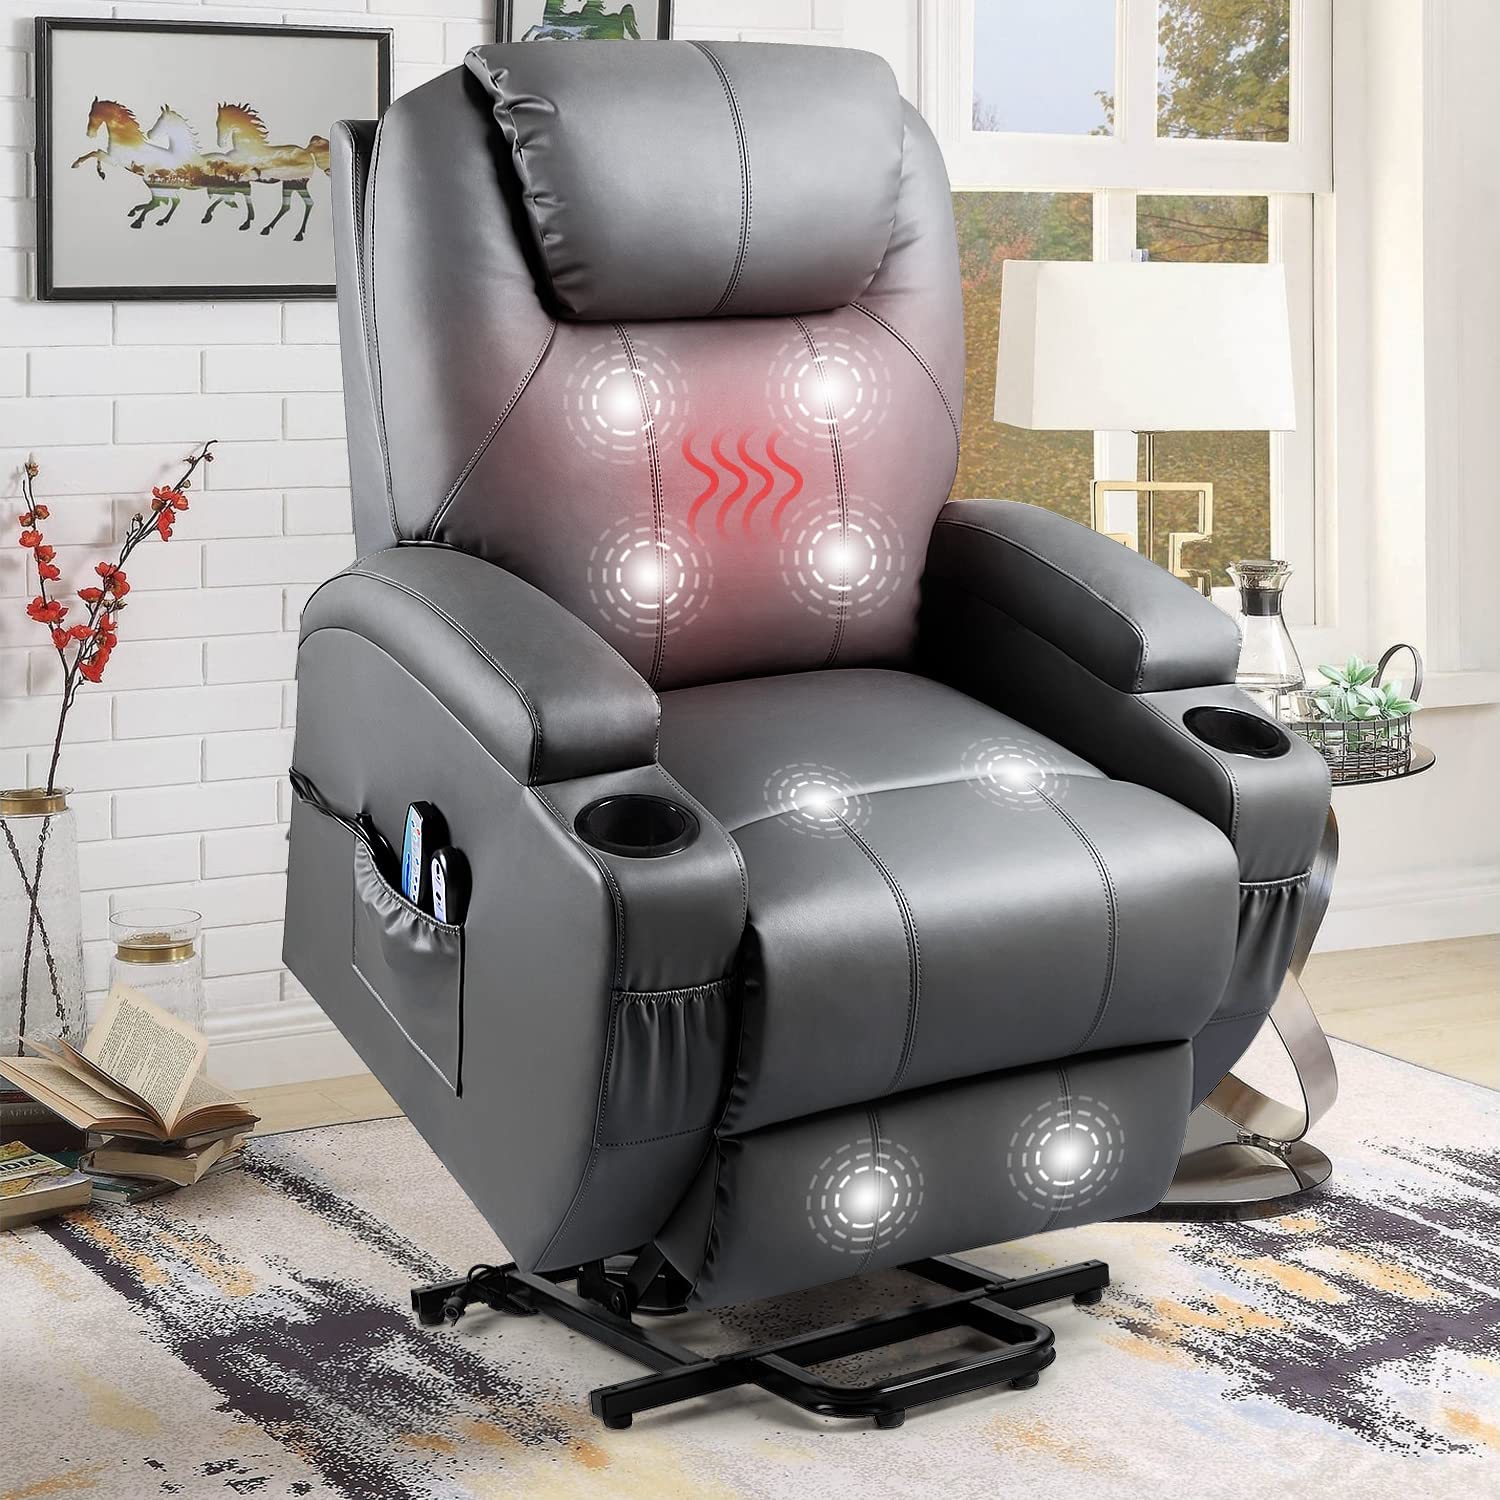 Reclining Lift Chair - Yeshomy - Wasatch Medical Supply